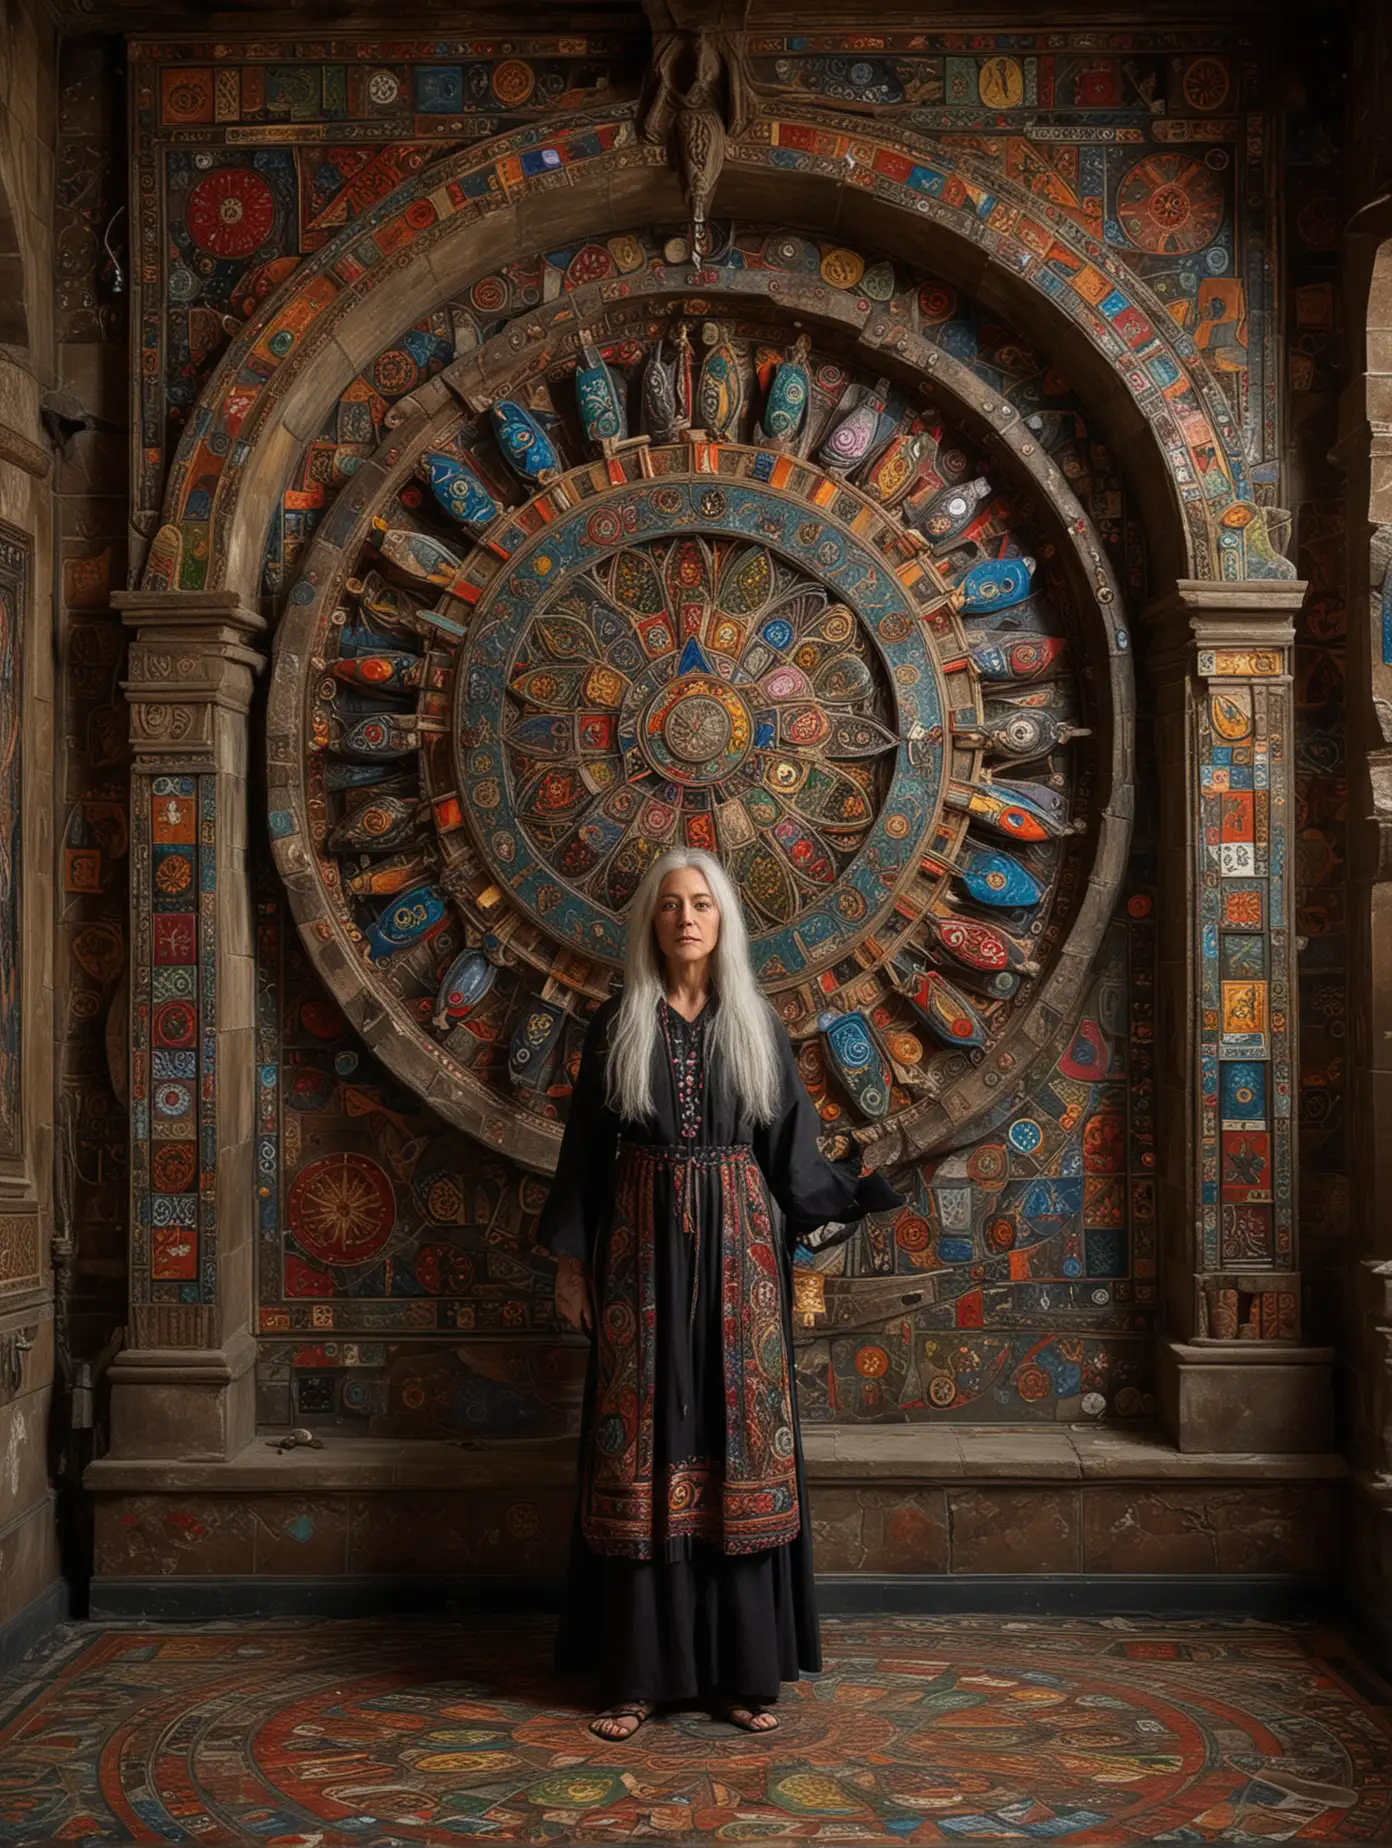 A large shining hanging very detailed photographic mechanical wheel of fortune : 1. | distant blind folded female shaman with long grey hair wearing a colorful tunic adorned with mandalas and magical symbols : 1. | indoor of a vast gothic alchemical hall with carved walls in the back  : .9 | mosaic floor with fractal patterns : 1. | glass amphora and bottles with magical signs : .9 | walls painted with colorful magical symbols : 1. | dark, nordic atmosphere : 1. | highly detailed,high precision,focus on textures, photographic, hyperrealistic : 1. 